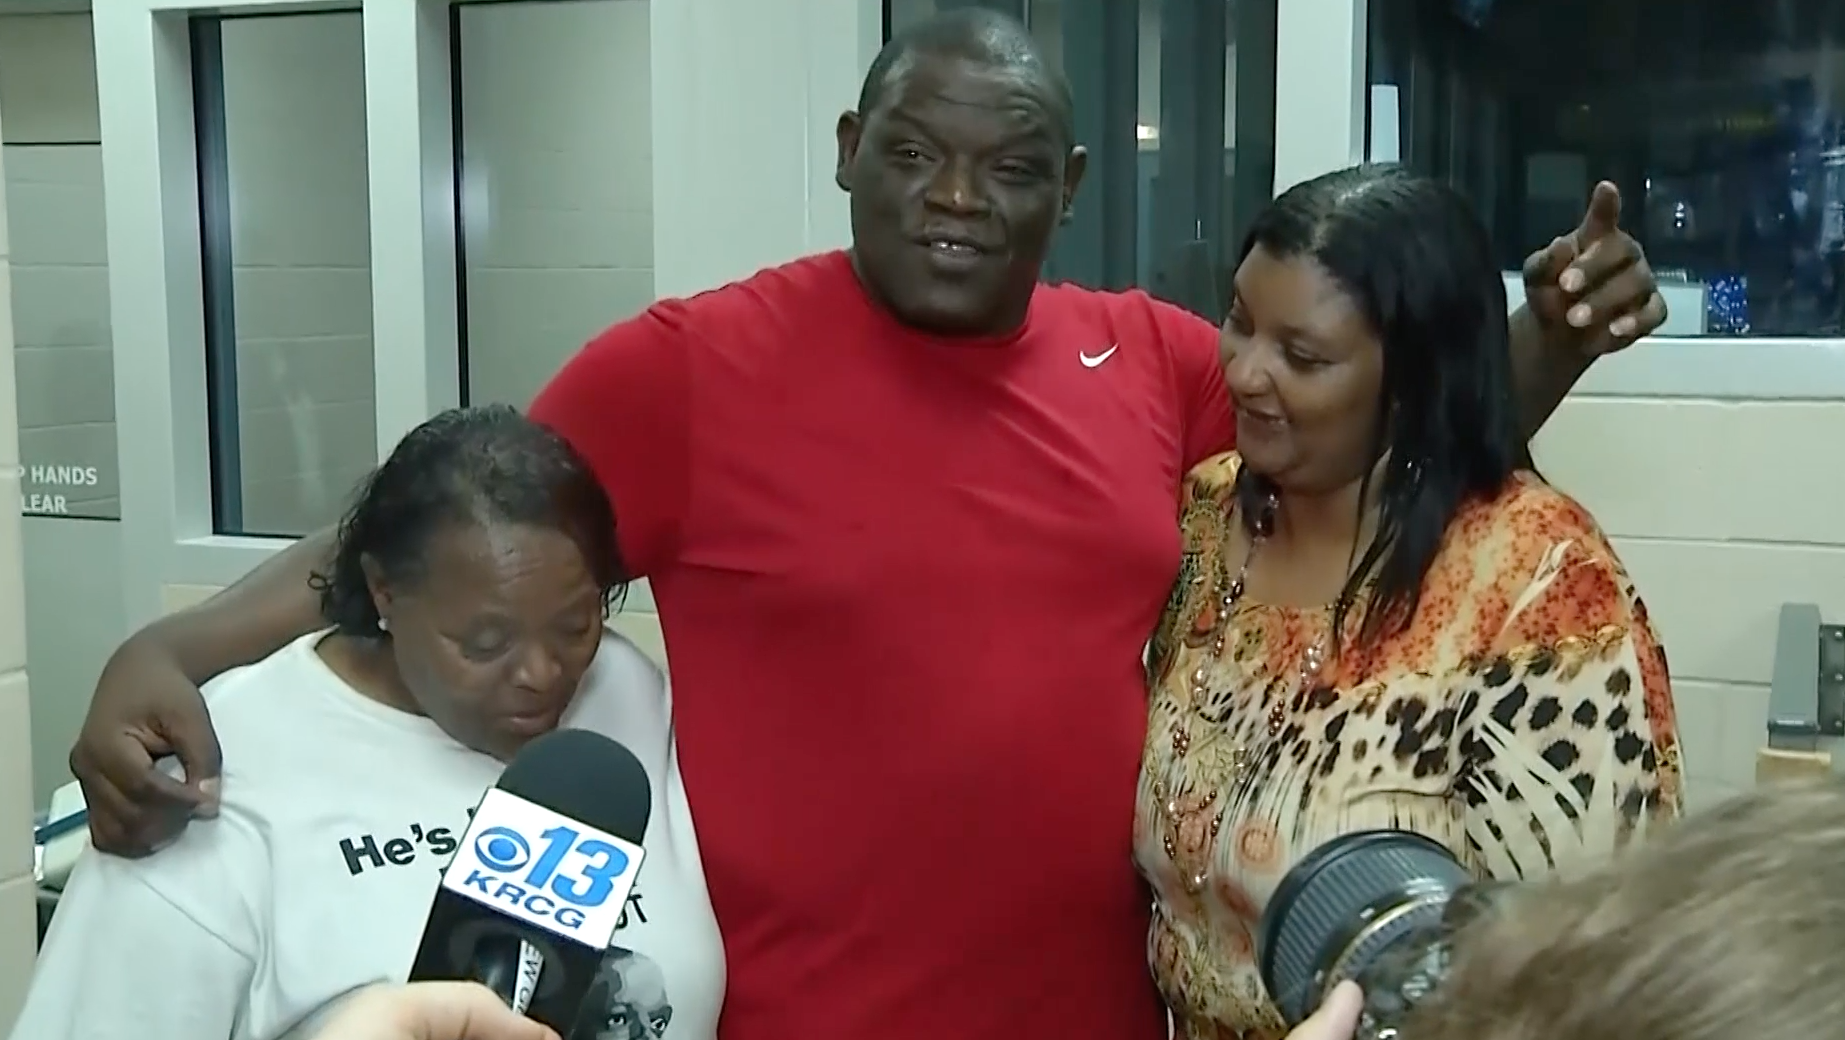 49-Year-Old Innocent Missouri Man Who Spent 18 Years Behind Bars Finally Set Free